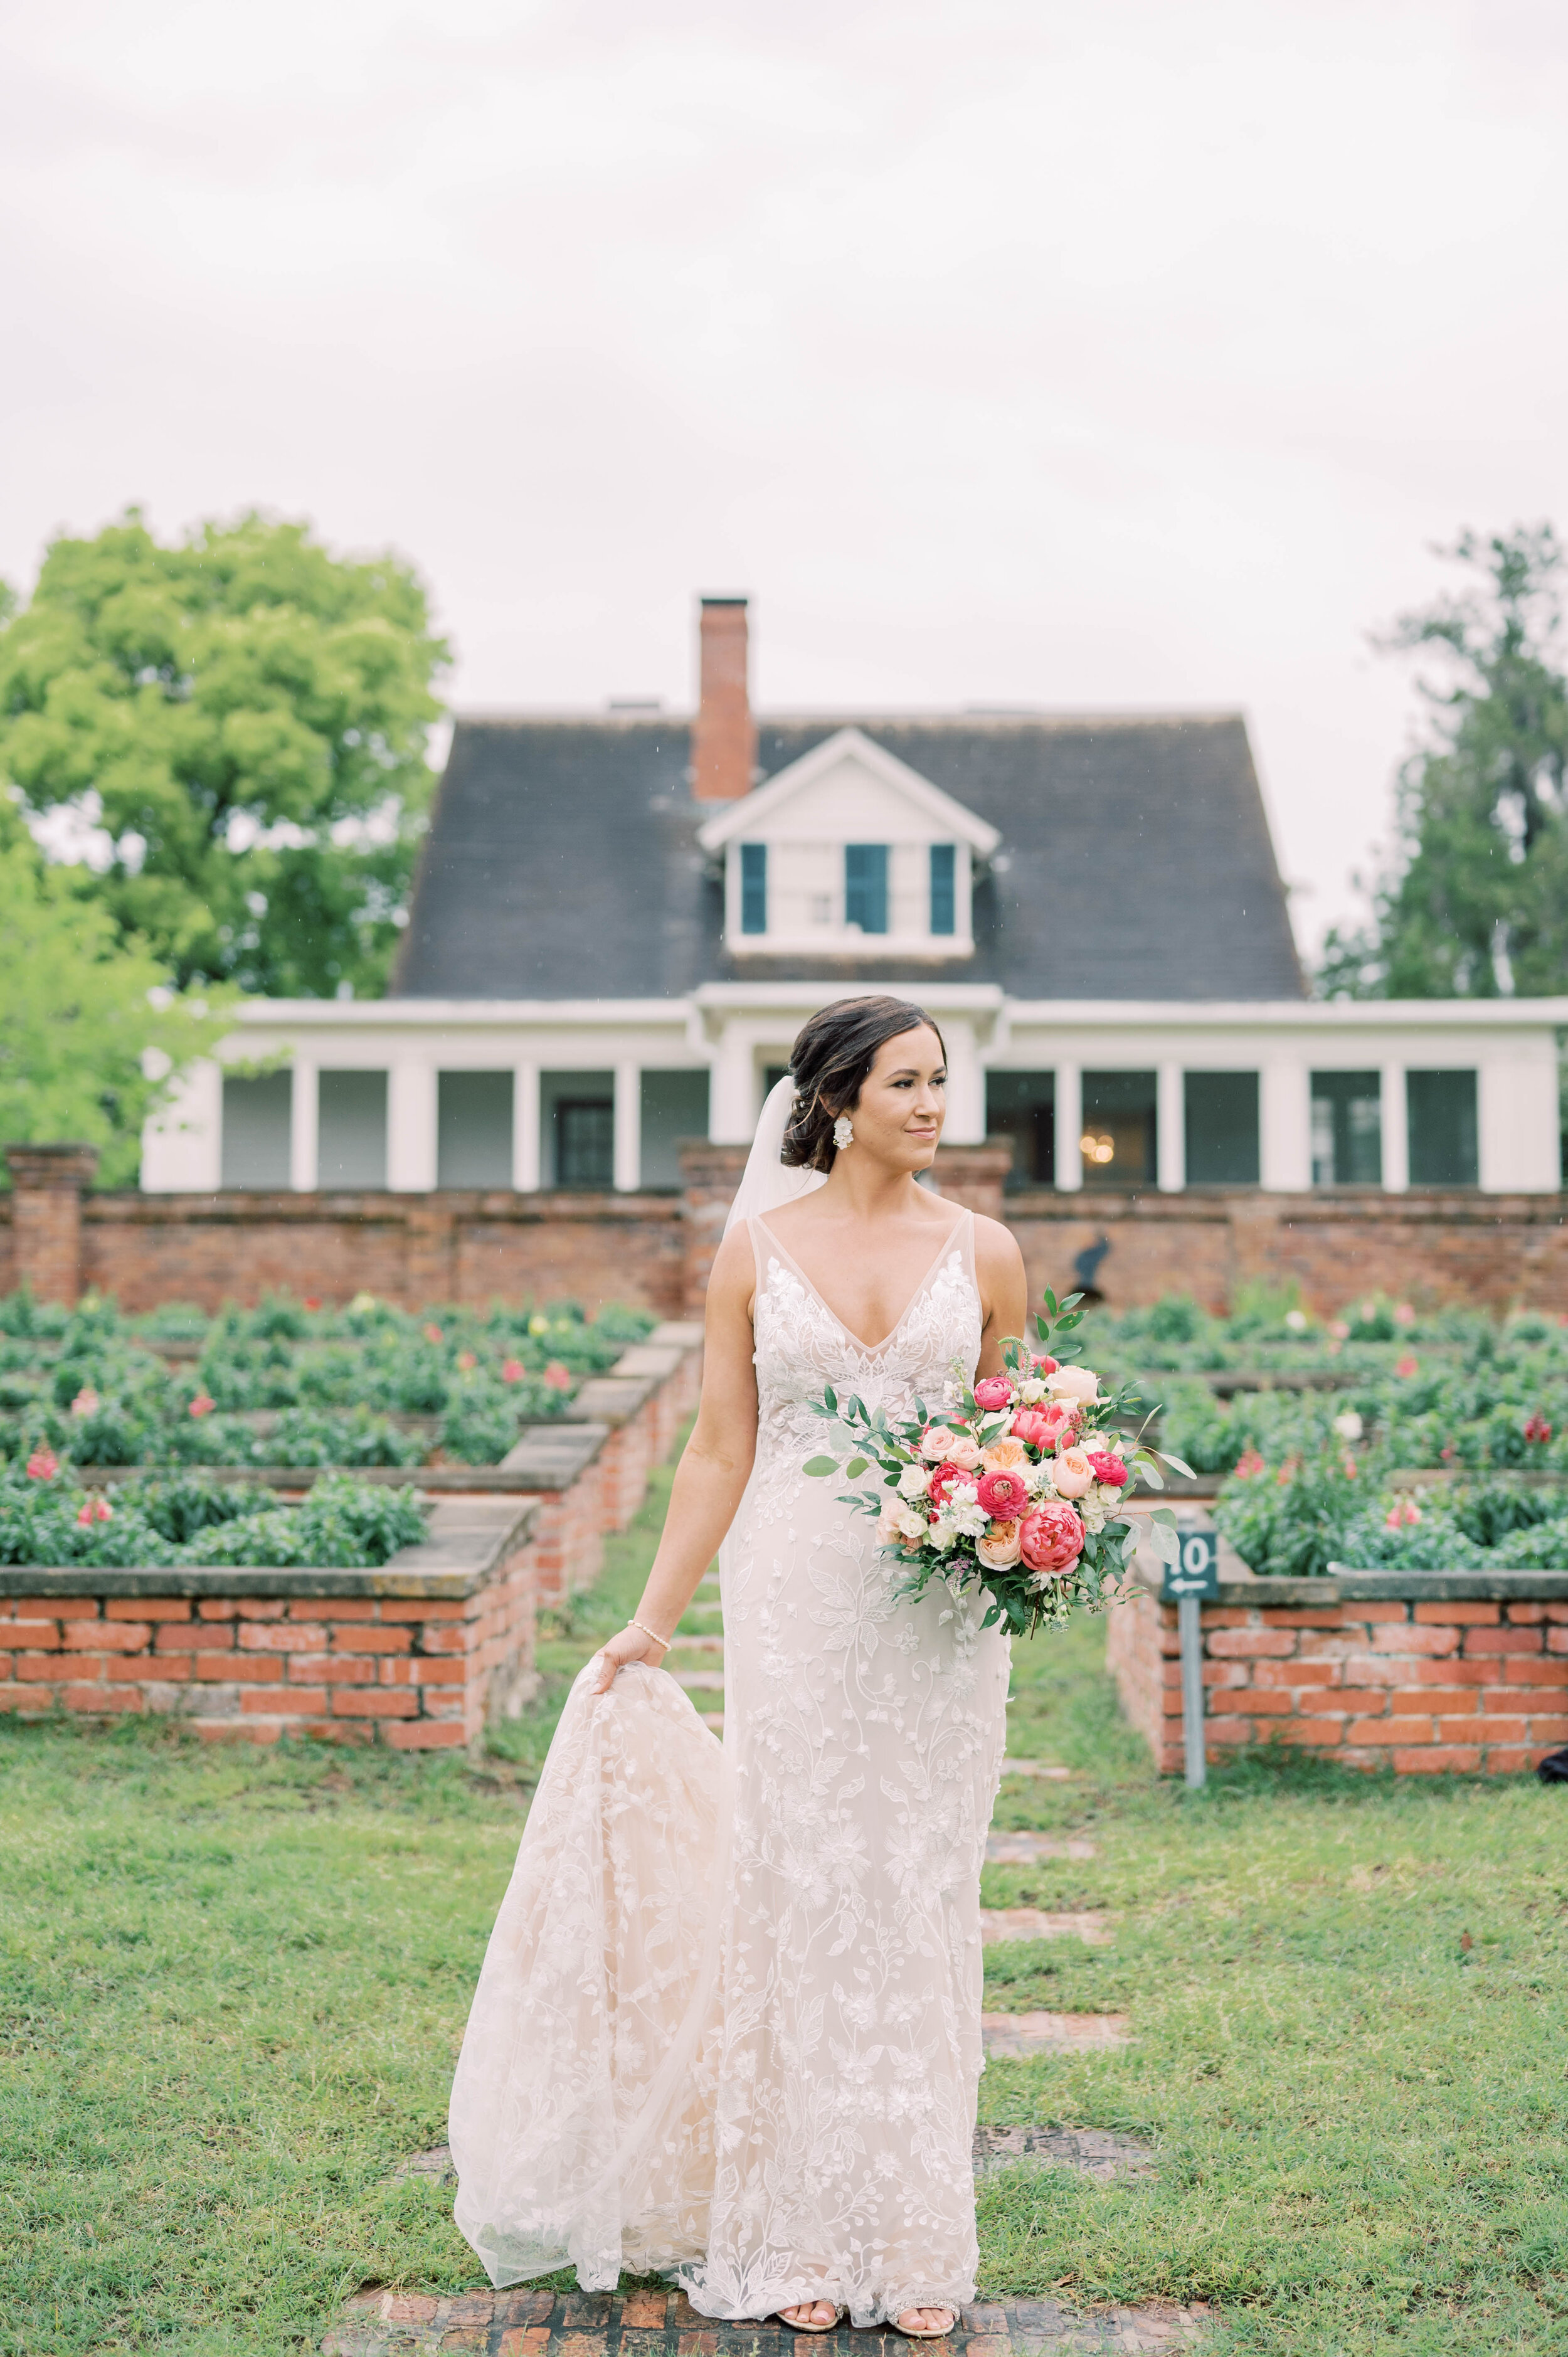 ivory-and-beau-blog-wedding-blog-ivory-and-beau-bride-madison-down-for-the-gown-made-with-love-wedding-dress-bridal-gown-wedding-gown-real-bride-real-wedding-bridal-shop-savannah-georgia-21Madison.Blake-226.jpg